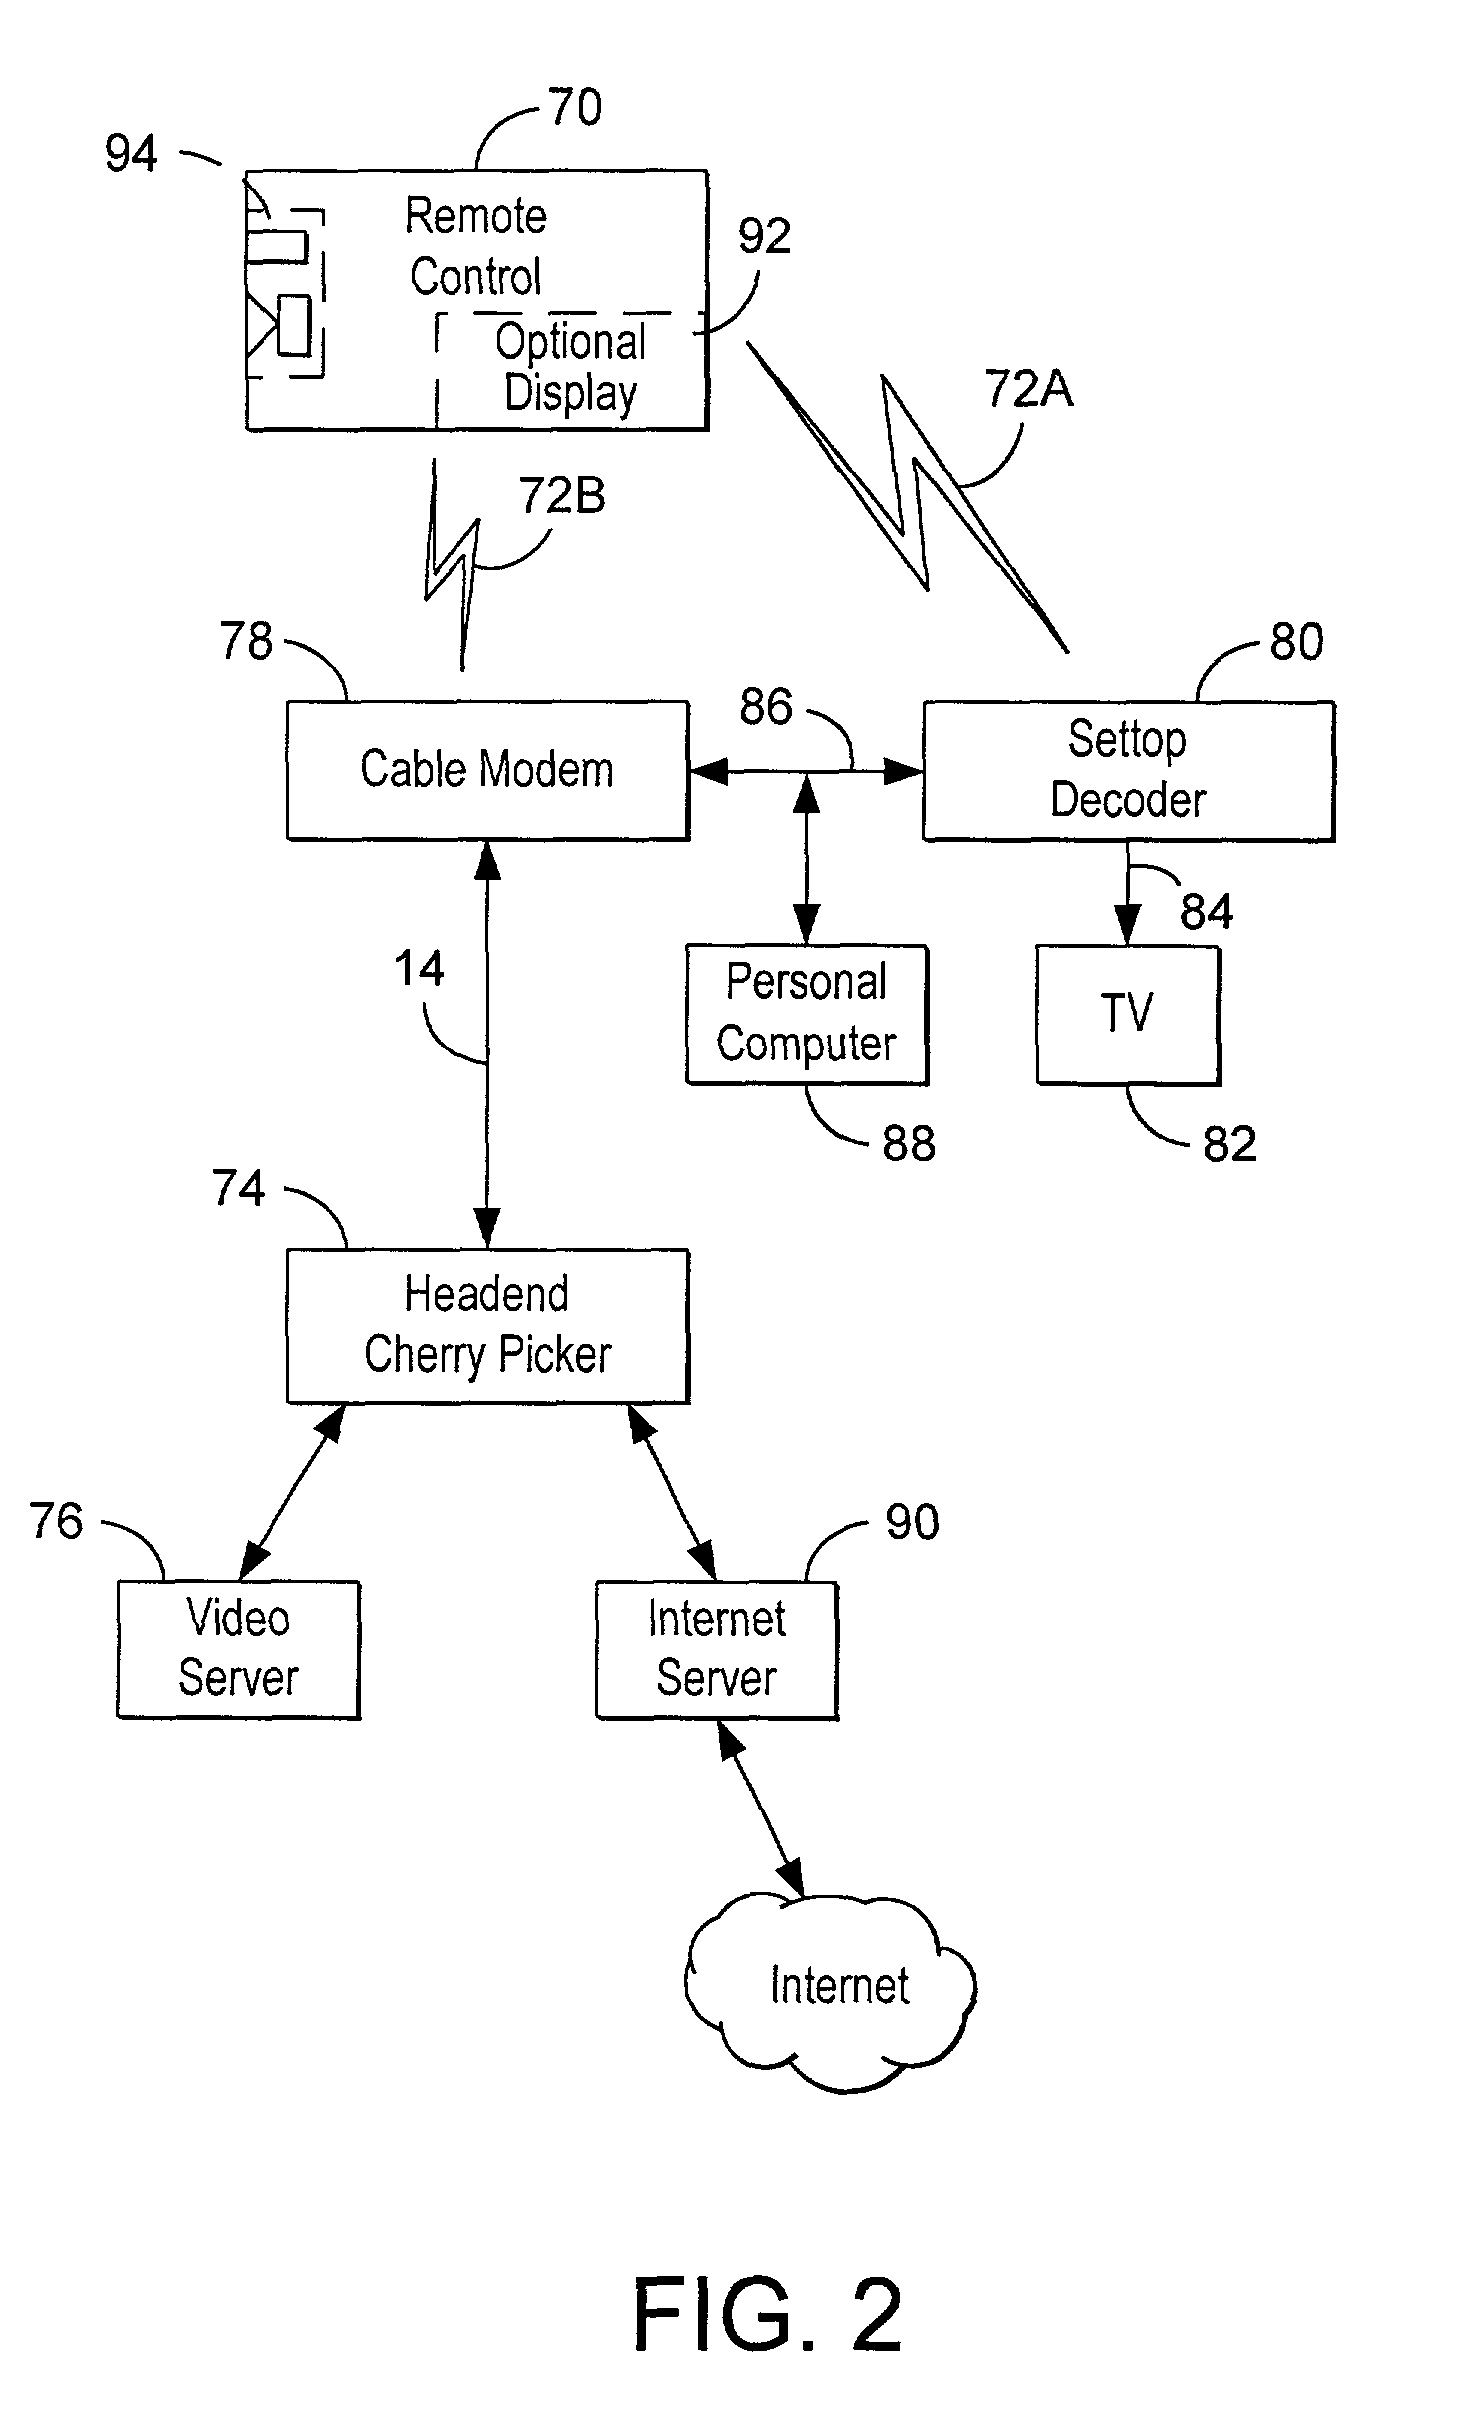 Remote control for wireless control of system including home gateway and headend, either or both of which have digital video recording functionality